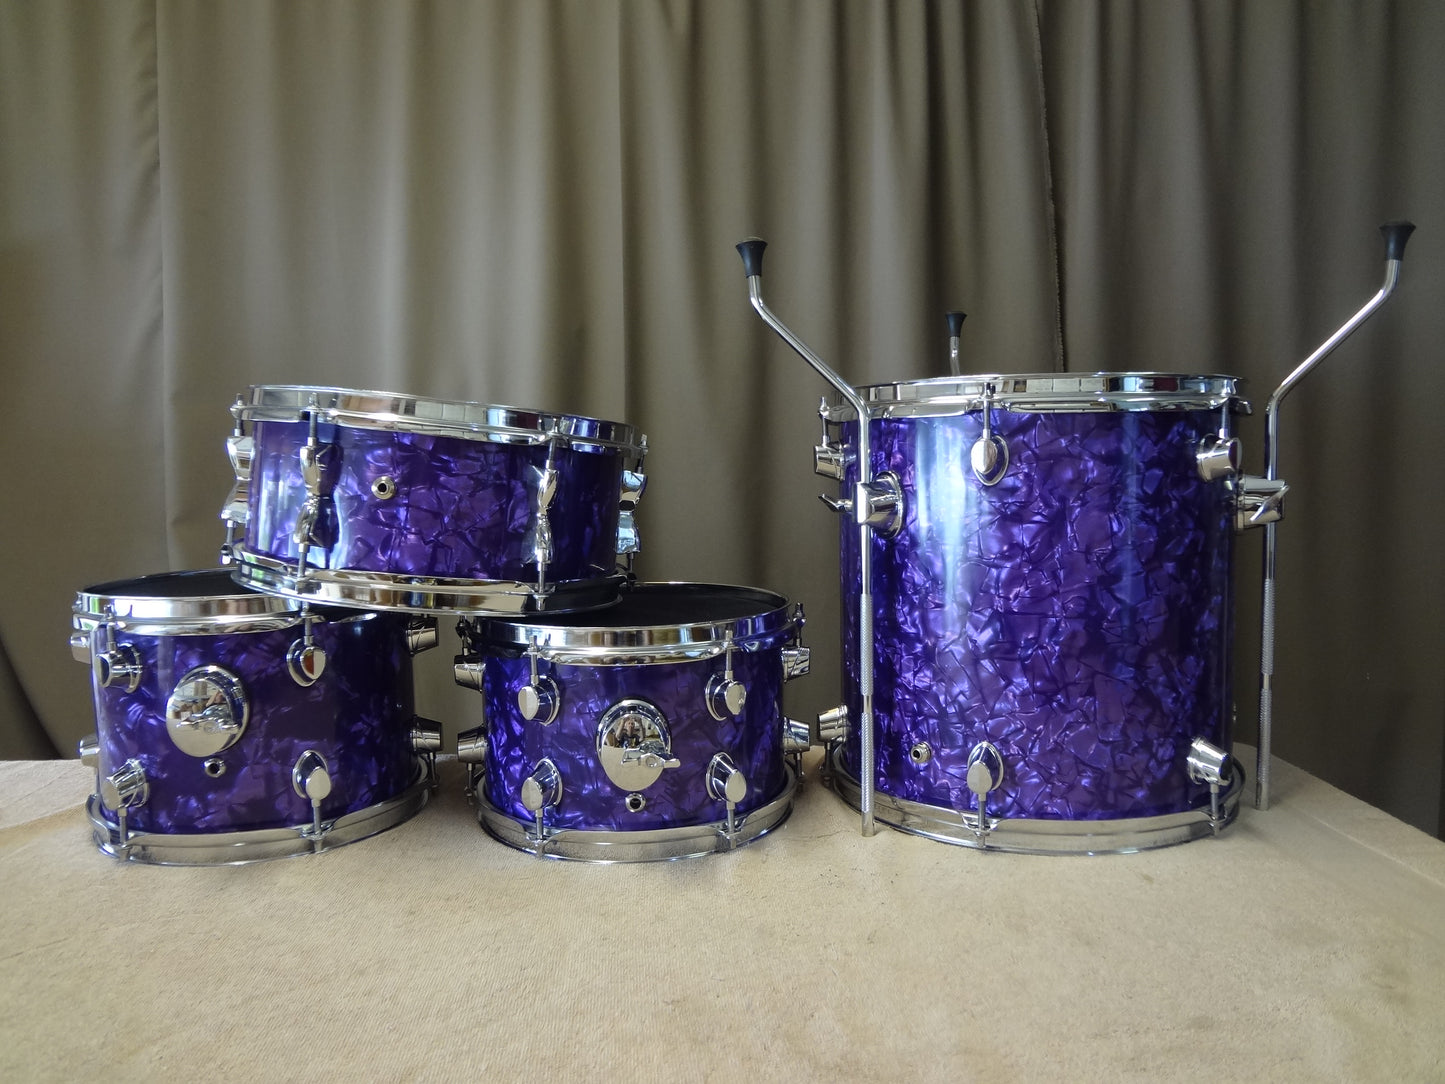 4 Piece Custom Built Electronic Drum Kit - Purple Pearl - (Electronic Cymbals and Hardware Included)